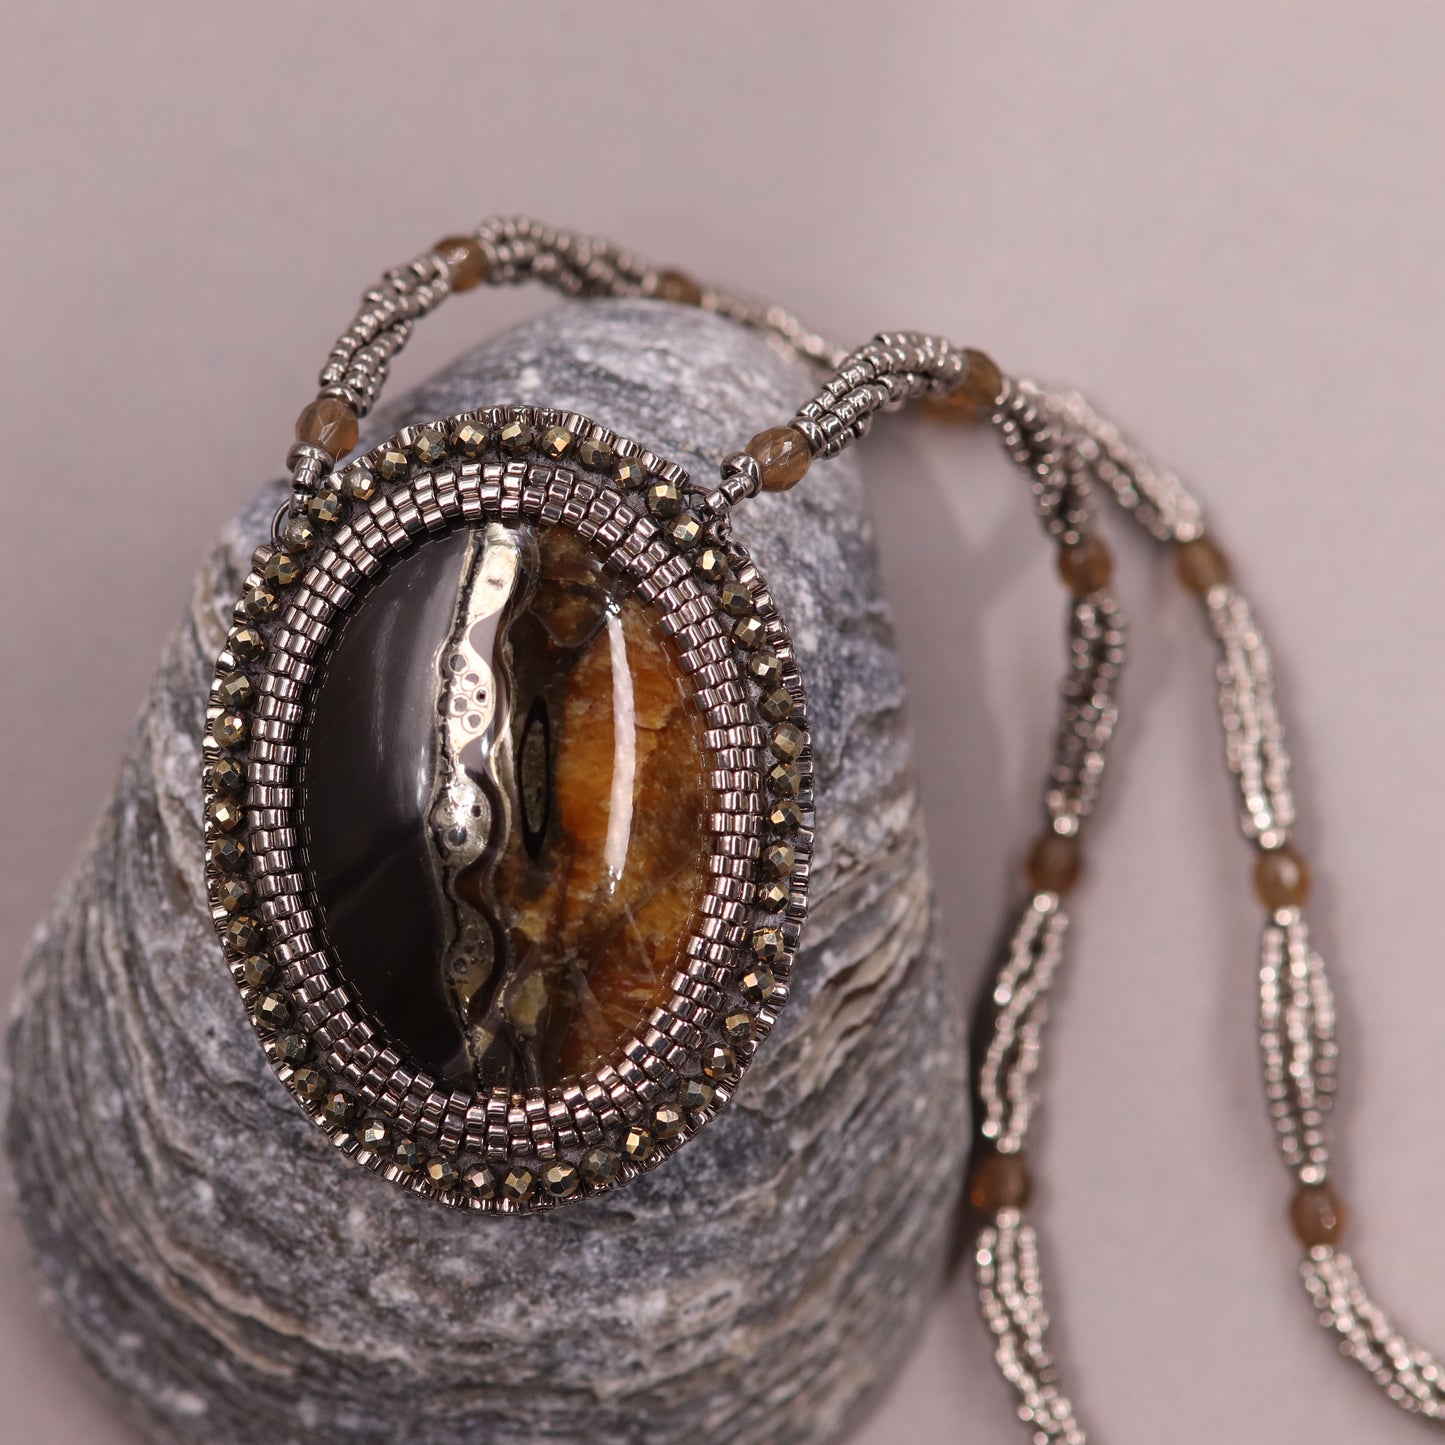 Necklace with pyritized ammonite and yellow calcite